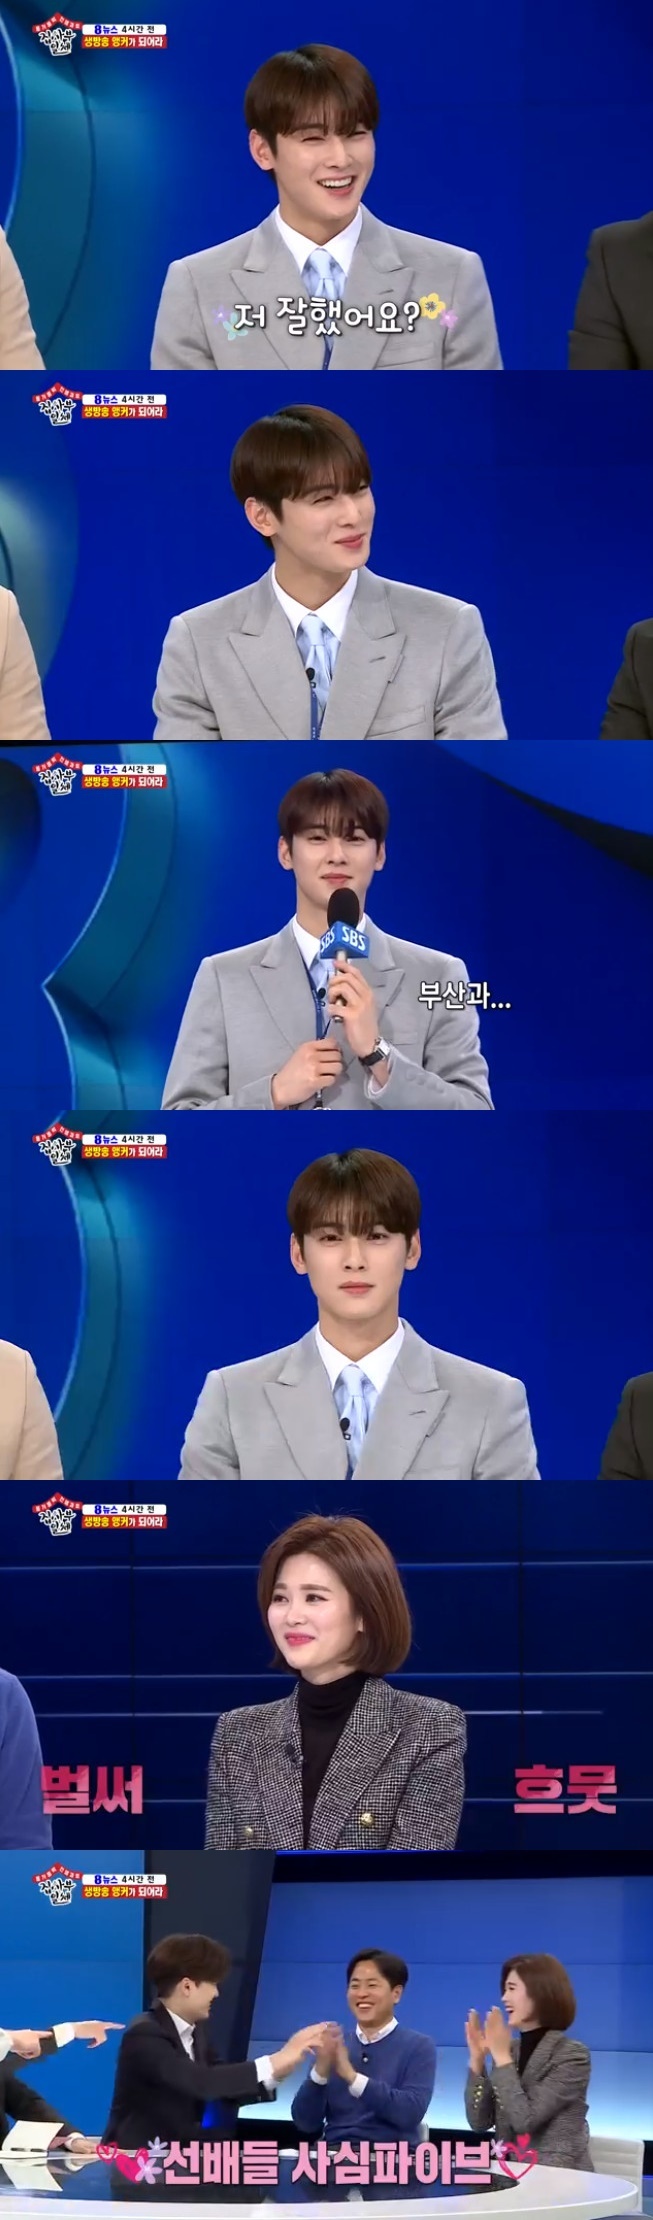 Seoul = = Face Genius and Sense Innocent Cha Eun-woo appeared on All The Butlers.SBS All The Butlers, which was broadcasted on the afternoon of the 19th, was decorated with Broadcast Station 24 oclock special with Lee Seung-gi, Shin Sung-rok, Yang Se-hyeong and daily disciples Cha Eun-woo and Kim Dong-Hyun.The filming site was the Baro SBS office building, and under the setting of joining the new SBS employee, the members took written tests and field trips and looked around the station.The first person the members met was a Baro interviewer.Yang Se-hyeong, who interviewed the interviewer behind the blind, said, I do not think it is an interviewer when I see the sense of speaking.The identity of the interviewer was Baro Cha Eun-woo, who caused laughter as he asked members a sensible question.Lee Seung-gi looked at Cha Eun-woo and admired it, saying, It looks so handsome in real life, its like a real cartoon.Cha Eun-woo has also written a self-introduction letter to respond to the Super Rookie recruitment.In an explanation that English language, Japanese is possible, Cha Eun-woo introduced himself as an English language.Then, in the future hope, there were prosecutors and announcers, and the members said, Is not it a little study? Cha Eun-woo said, I worked hard when I was in school.When I was the best student, I was third in the whole school. Even the student president said, What kind of life did you live? They passed the first gate of the entrance examination by solving the actual problem of writing the SBS entrance examination.Cha Eun-woo came out and told me the correct answer as Kim Dong-Hyun wandered in the Han River writers Man Booker Award question.He then went on a field trip as a team that It wants to know. He also interviewed Professor Lee Soo-jung, a widely known criminal psychologist, while consulting on It wants to know.Cha Eun-woo has deeply dug into the PDs who want to know It, asking about the grievances they have experienced while actually covering and preparing for the broadcast, and asking about the activities of Professor Lee Soo-jung in detail.The next place they were headed for was the news headquarters, which was the top model for SBS news on the day of recording.Cha Eun-woo, who was actually a dreamer during his school days, was more passionate; Cha Eun-woo listened to his seniors and took notes, taking a serious stance.Lee Seung-gi was selected as the news host after the manuscript reporting, and Cha Eun-woo was the radio news host.On this day, Cha Eun-woo was well-matched with All The Butlers members with passionate attitude and sensible gesture as well as perfect visuals that remind me of the modifier face genius.His attitude to be active in the given is also in line with the theme of All The Butlers called Super Rookie Top Model and has a good synergy effect.